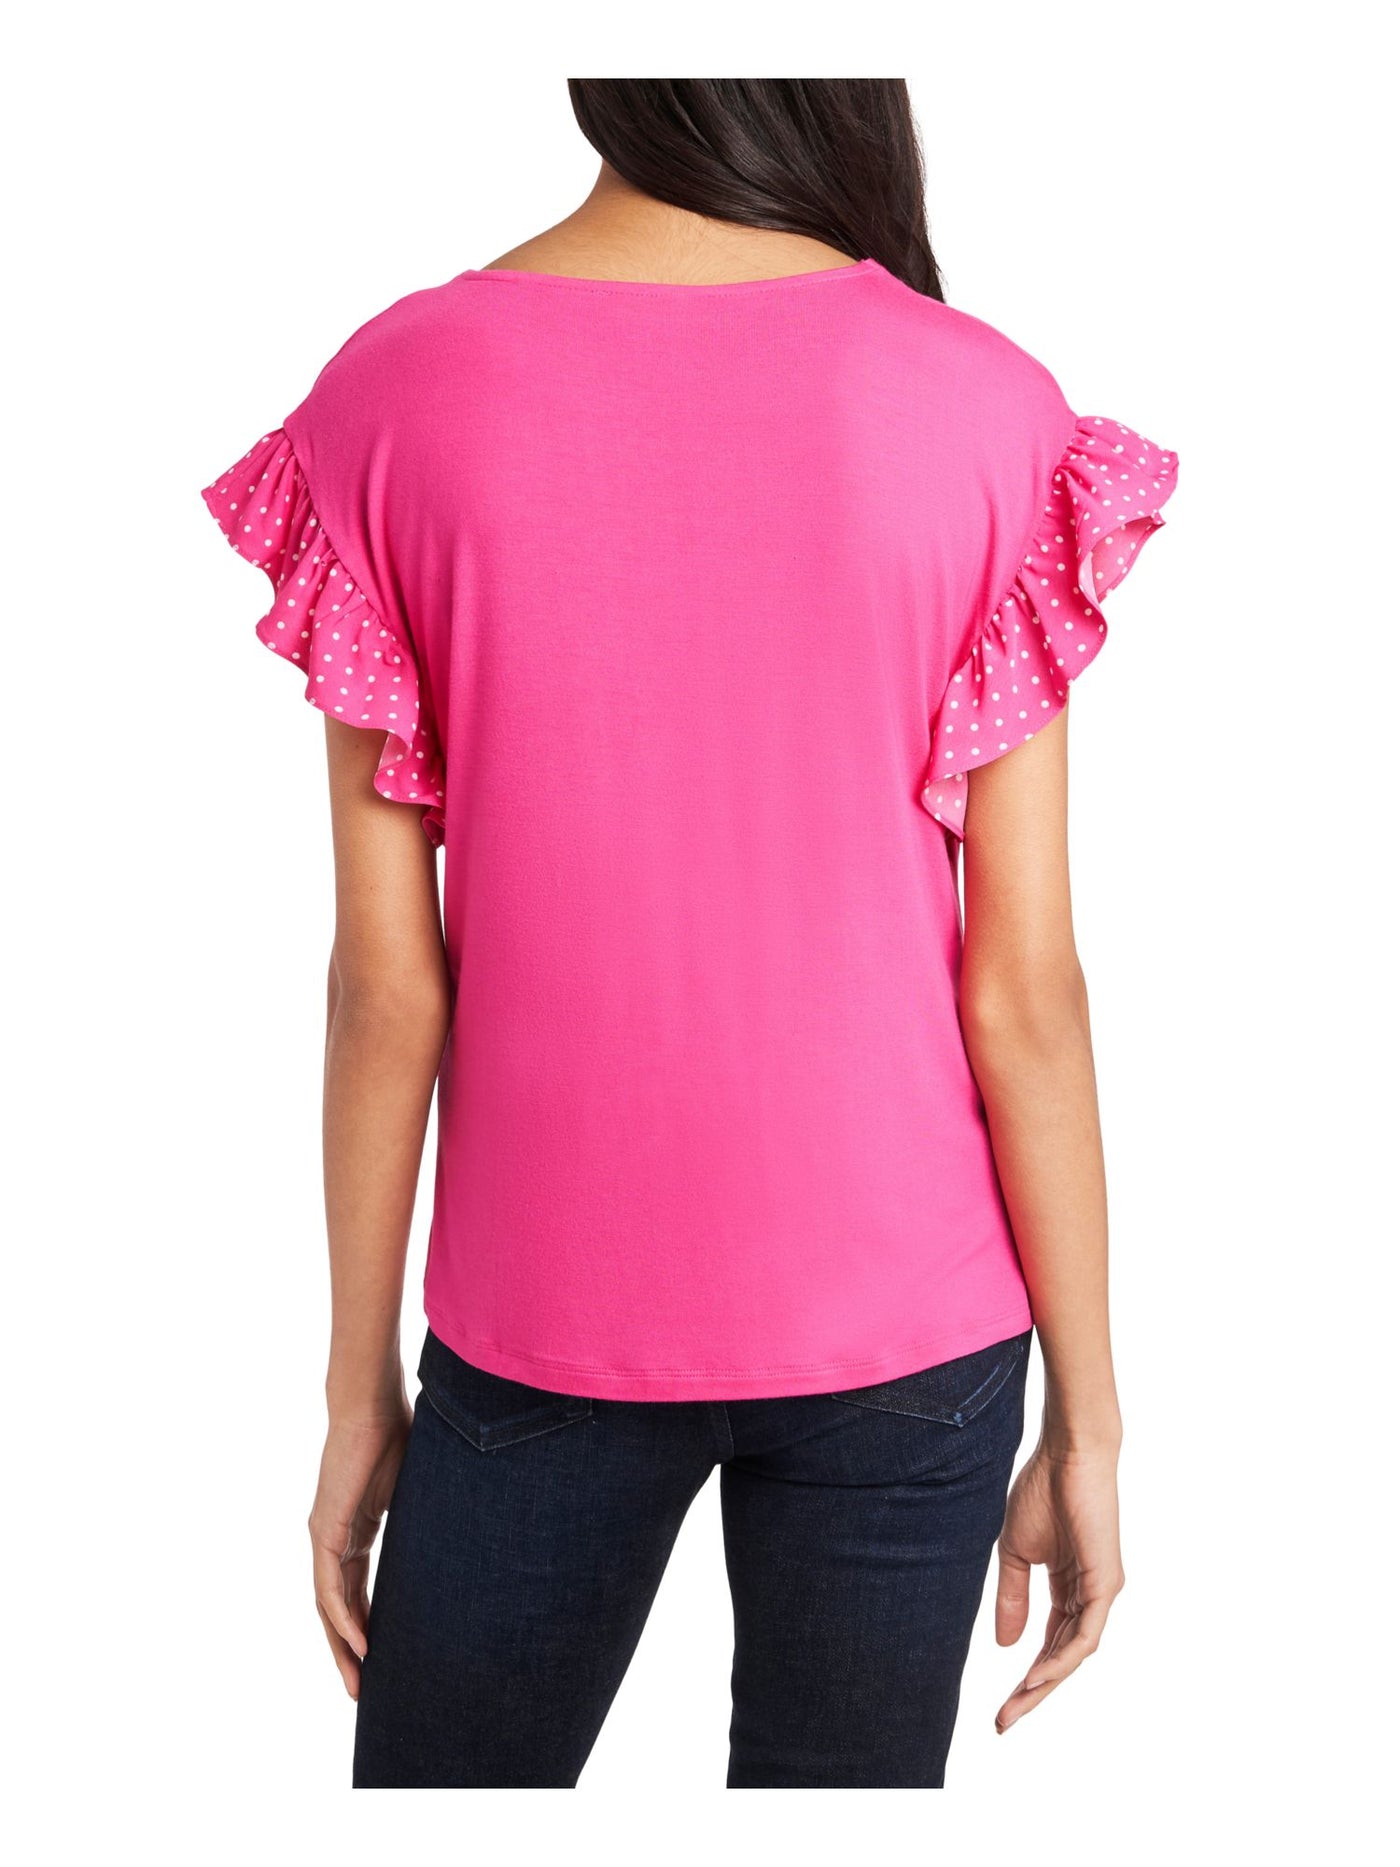 RILEY&RAE Womens Pink Stretch Ruffled Flutter Sleeve Crew Neck Wear To Work Top M